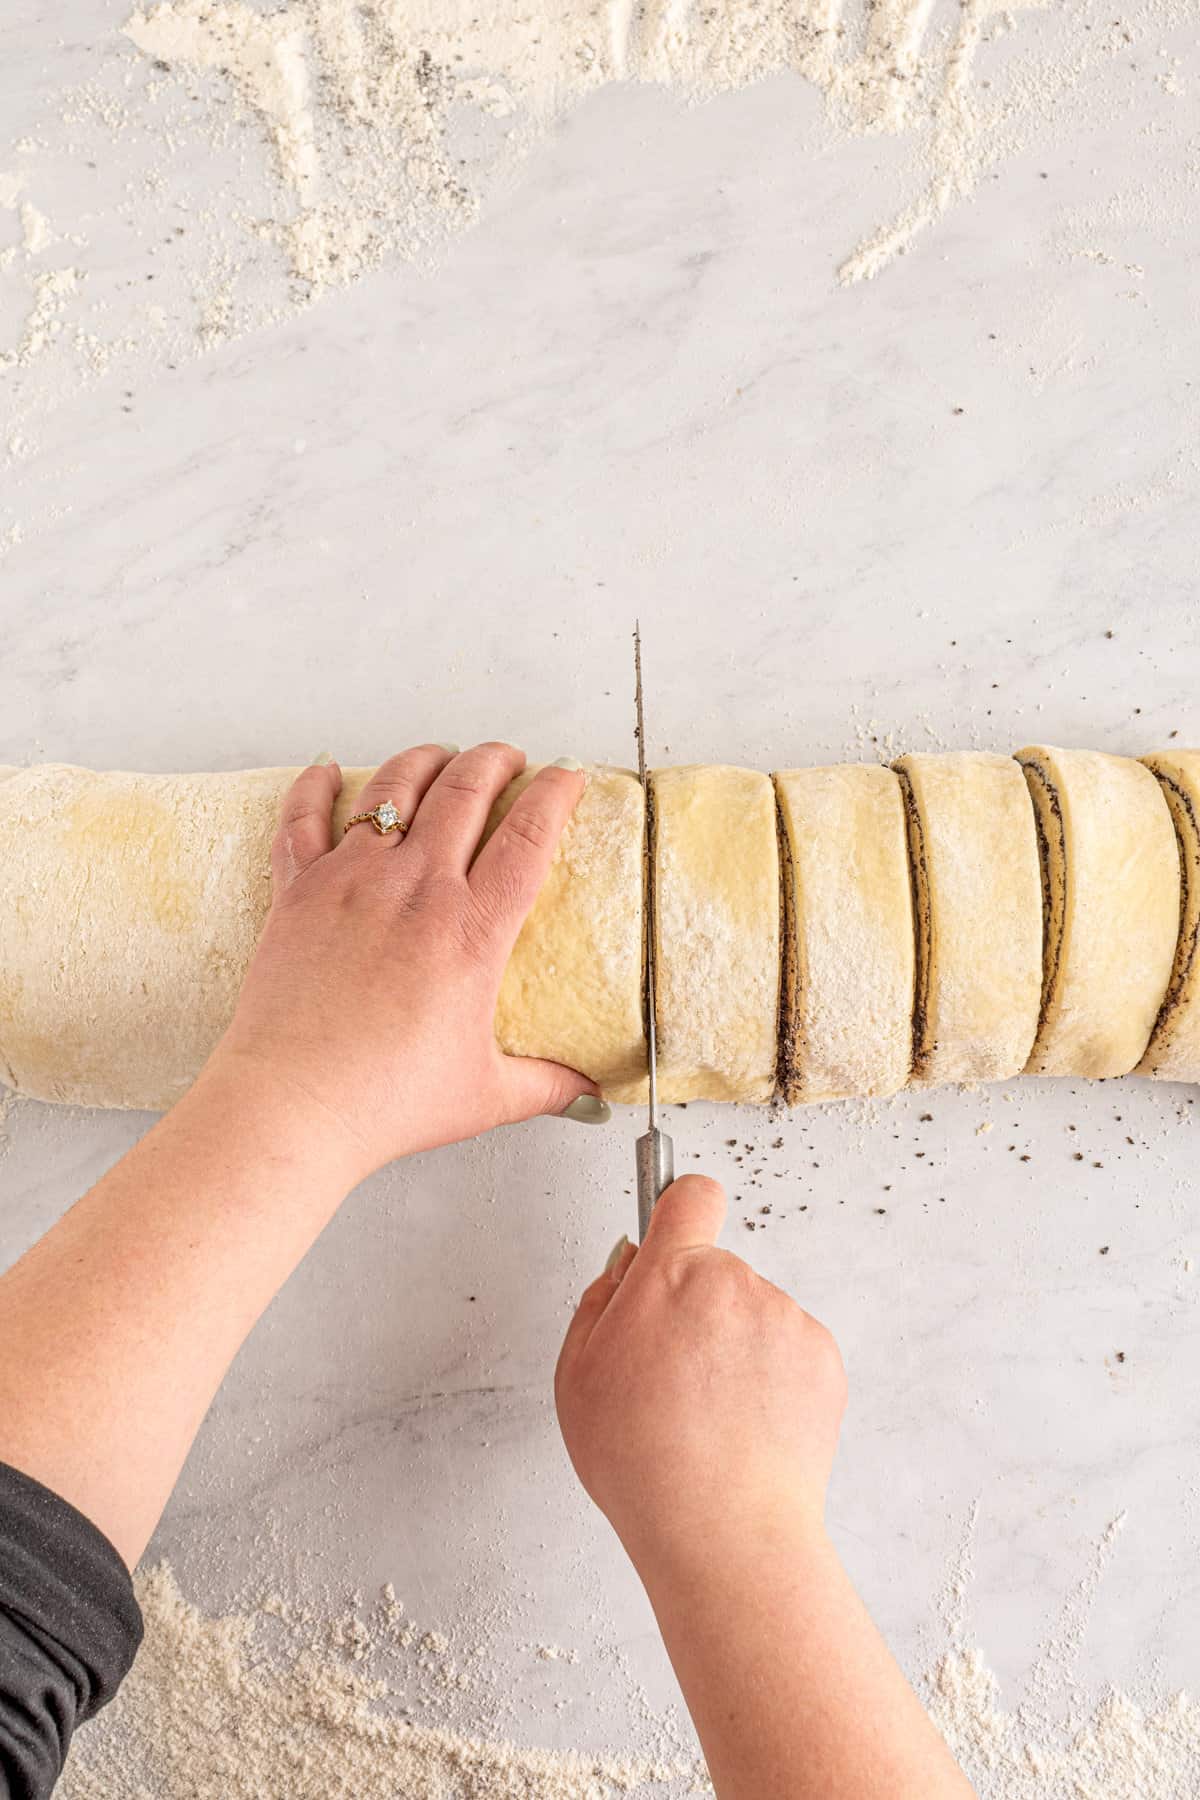 Hands slicing rolled dough into individual rolls.